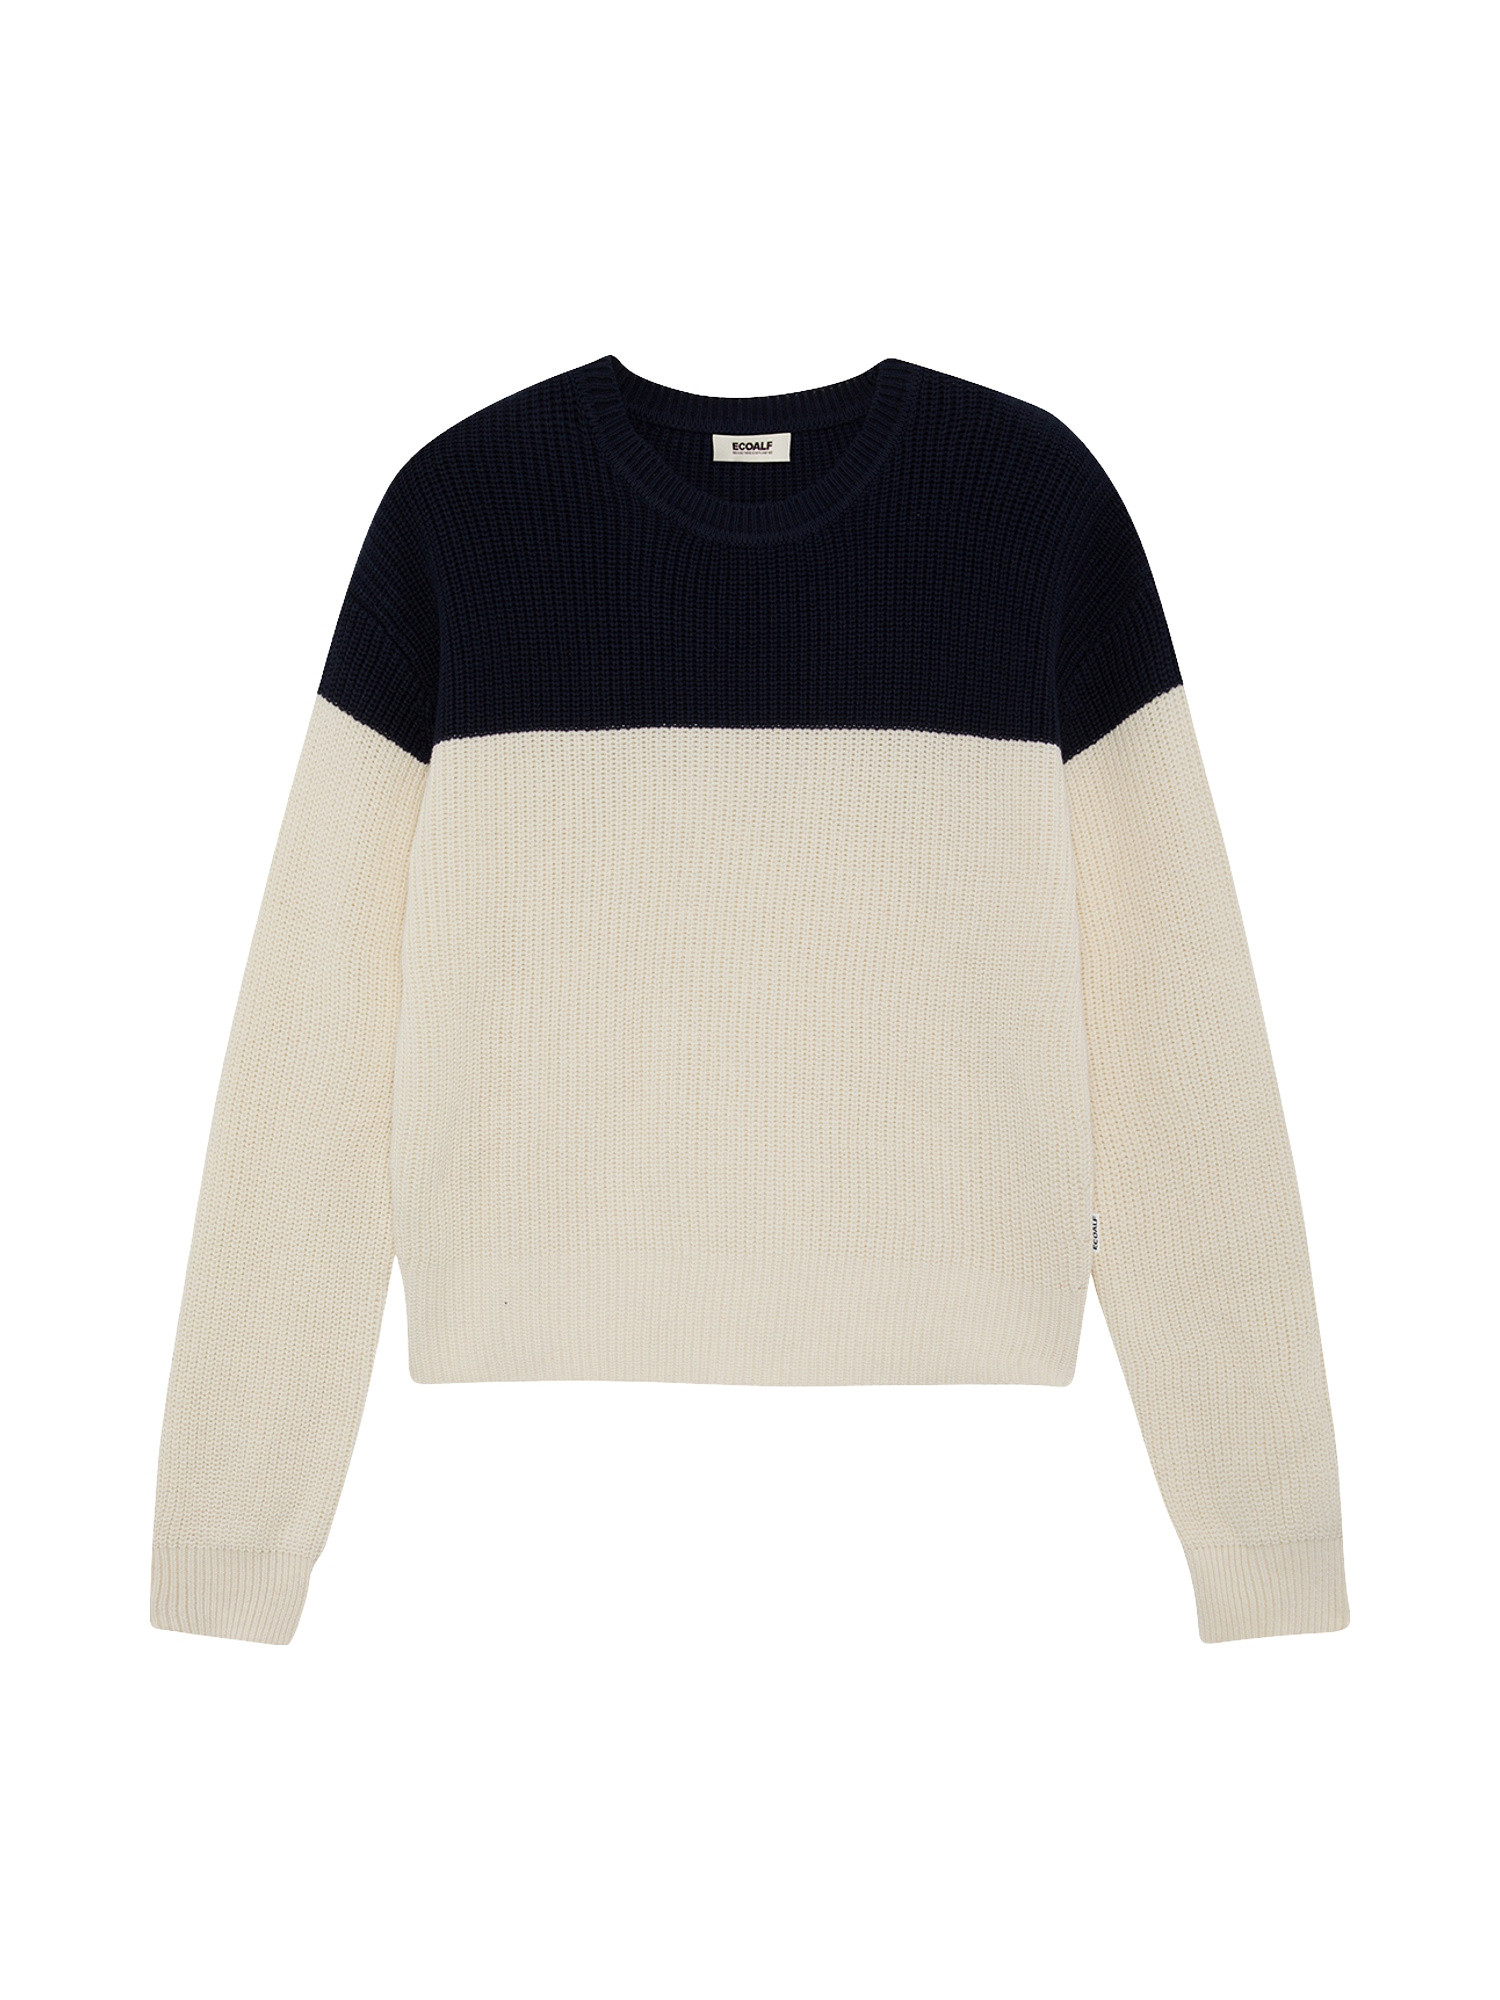 Ecoalf - Pullover in maglia Elm, Bianco, large image number 0